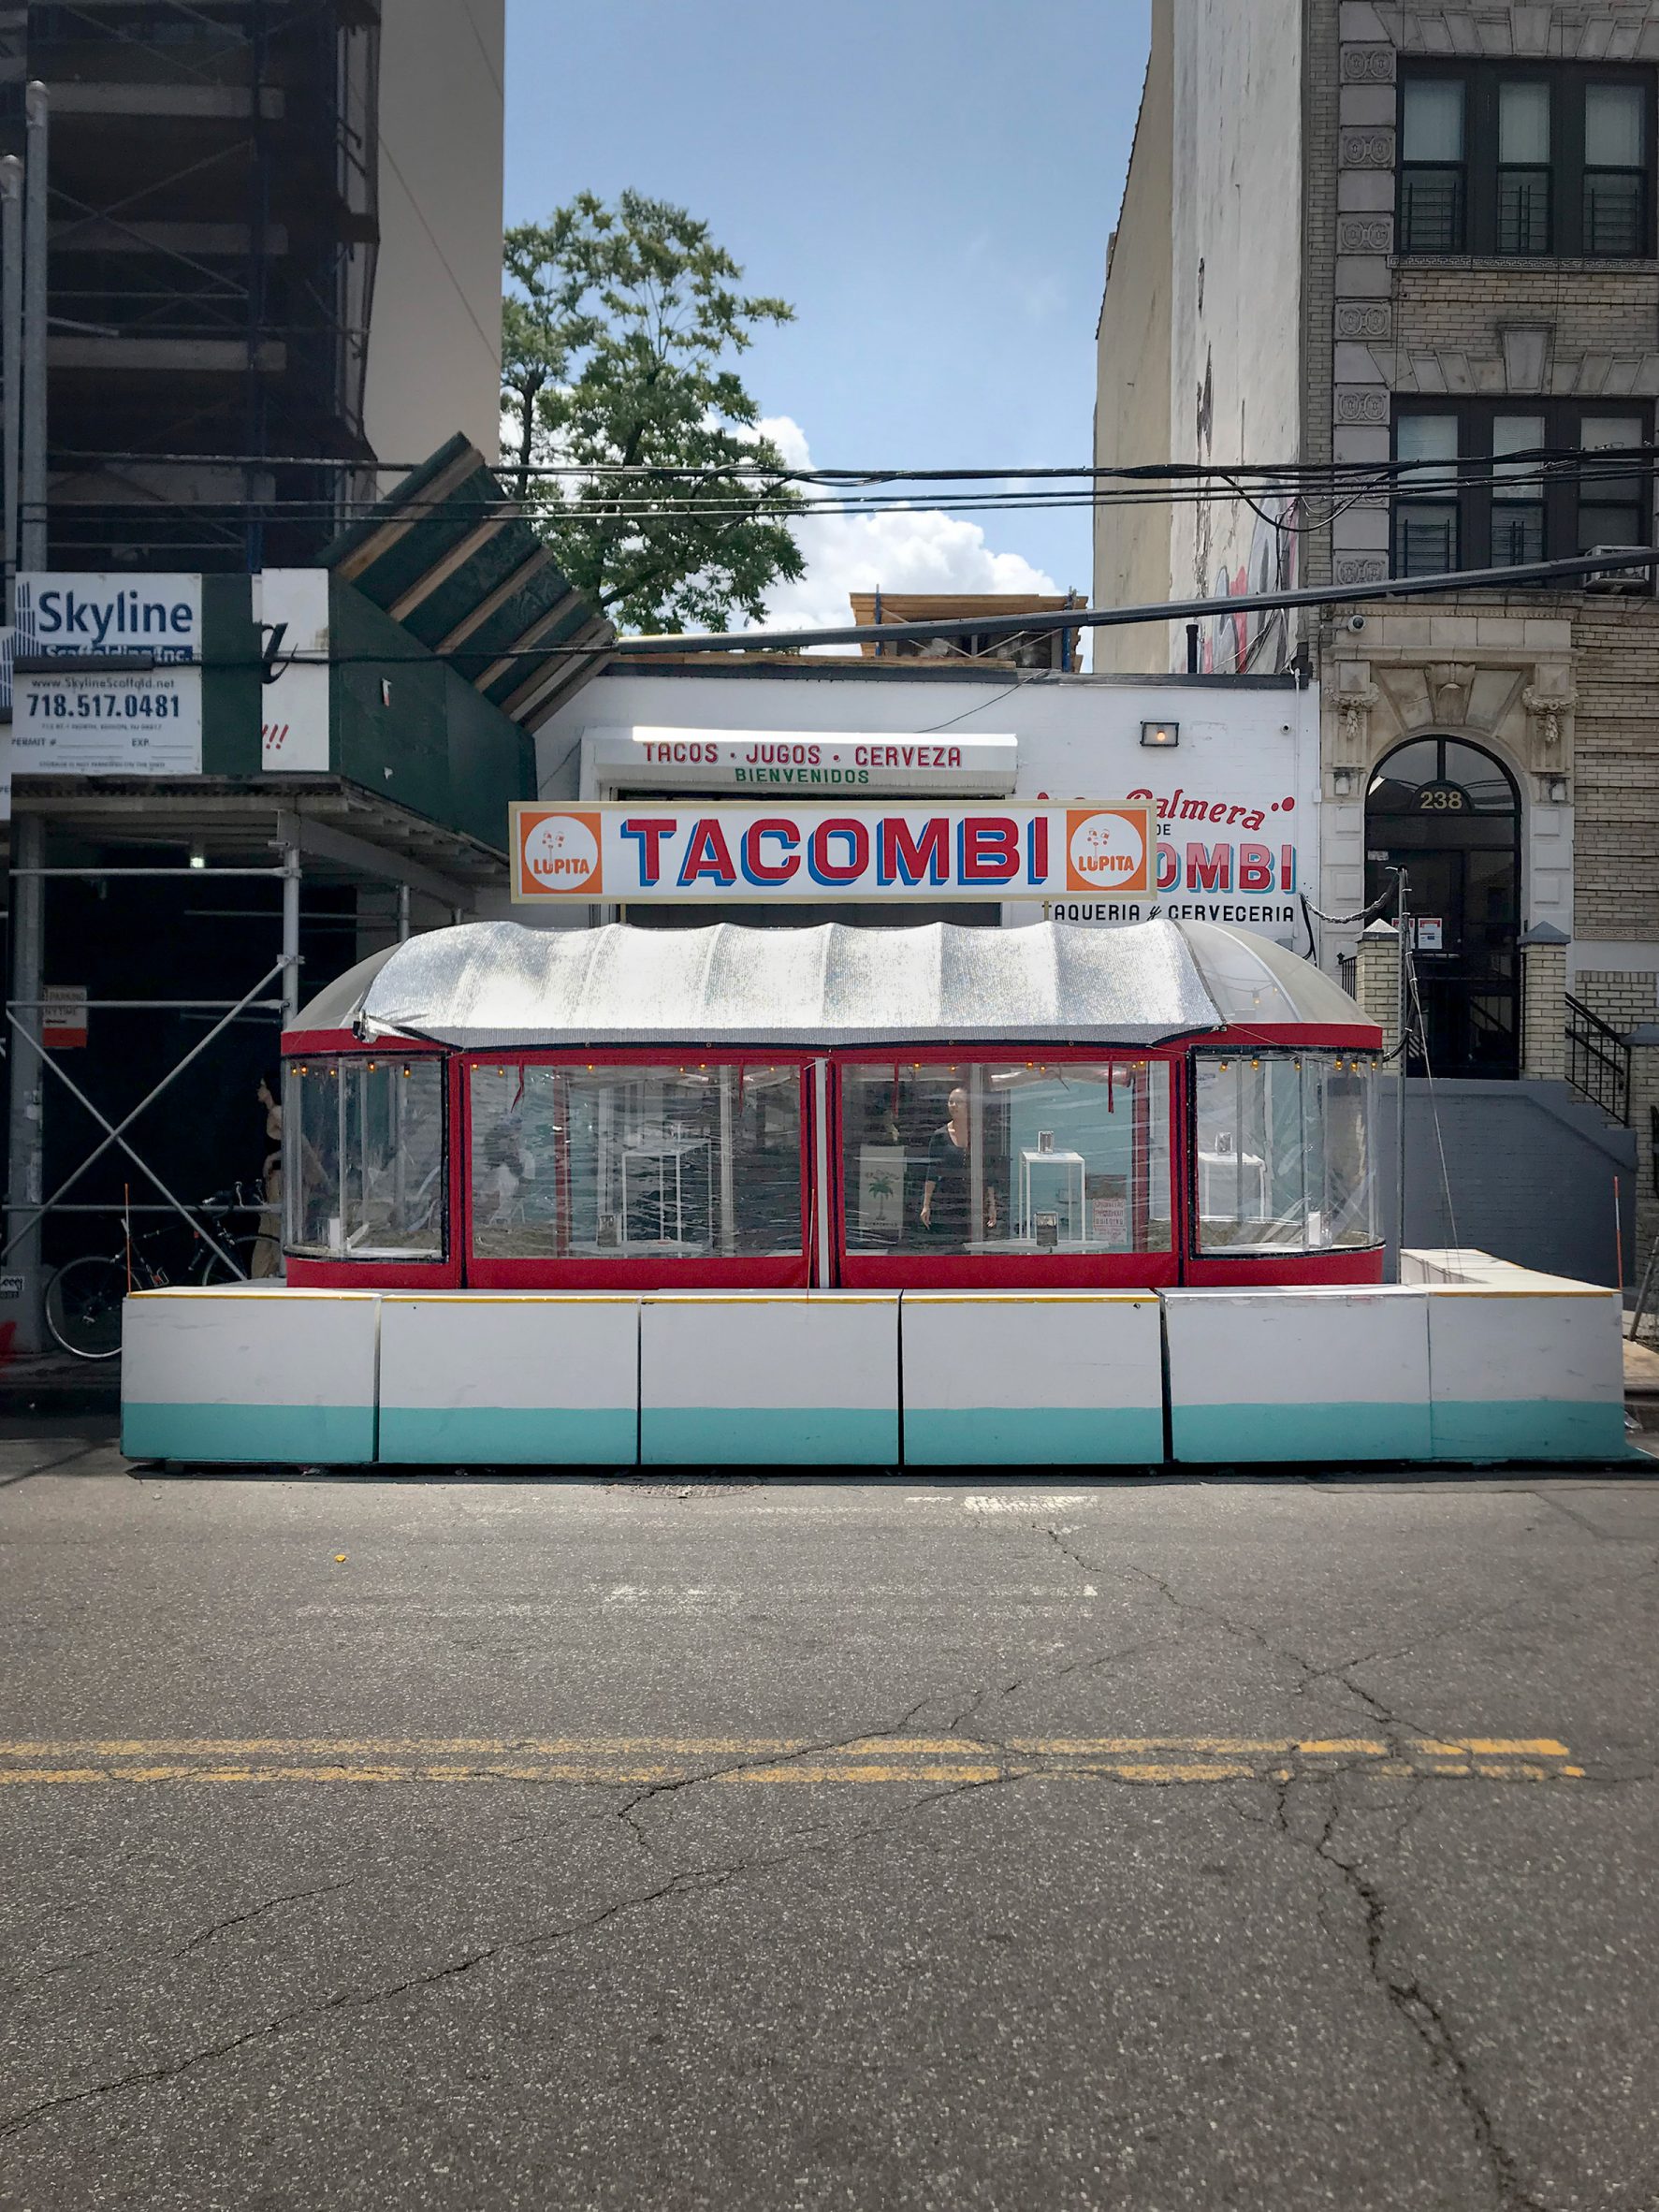 Tacombi outdoor dining shelter in New York City